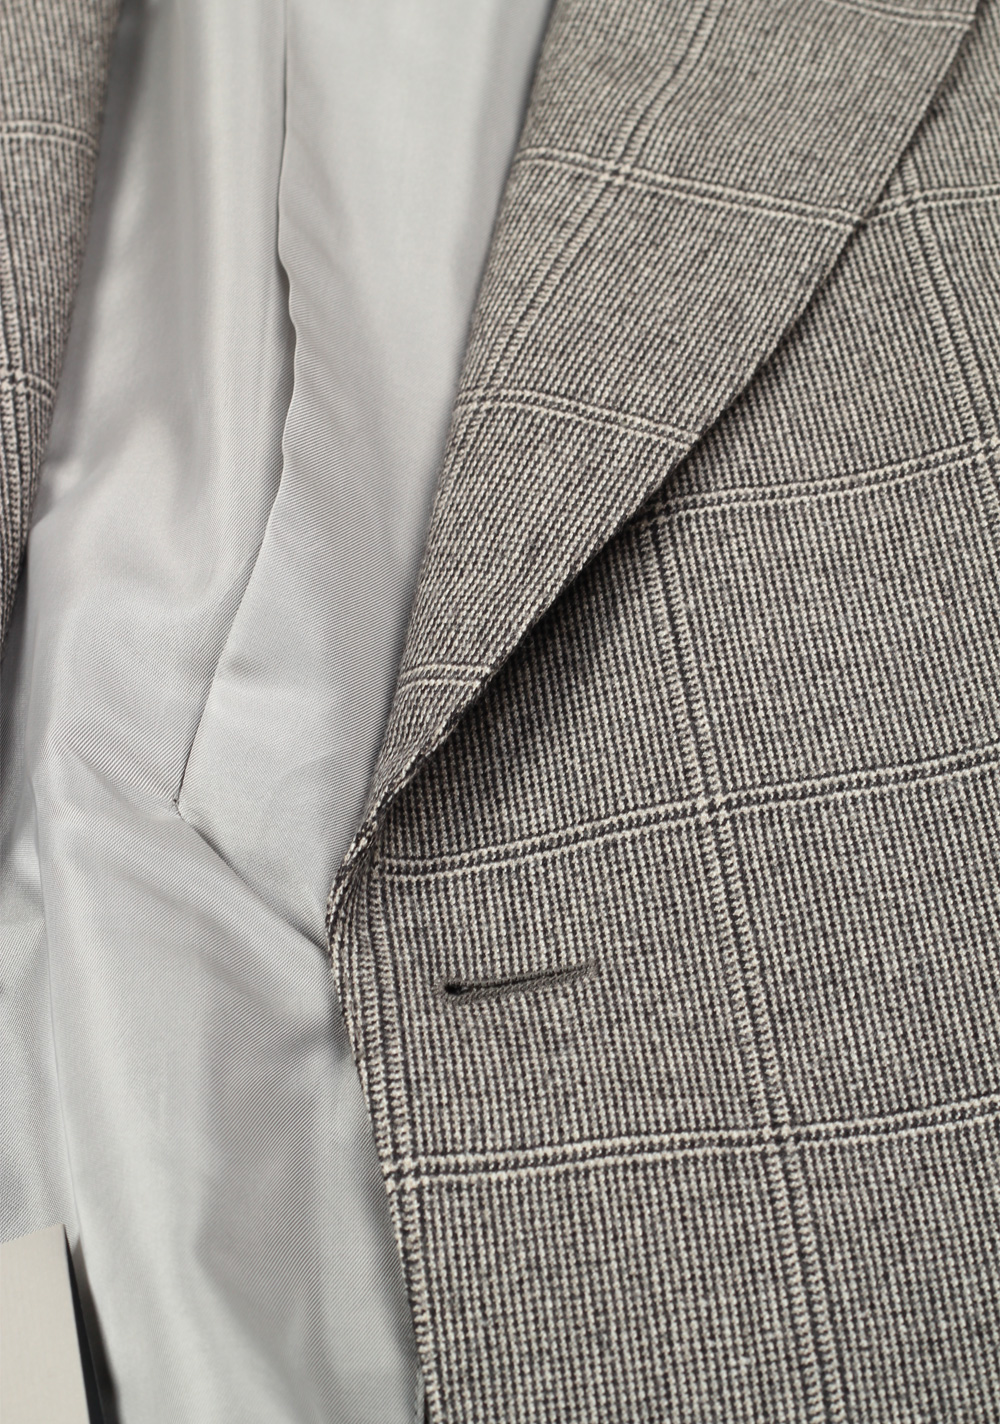 TOM FORD Spencer Gray Sport Coat Size 46 / 36R Wool Cashmere Fit D | Costume Limité